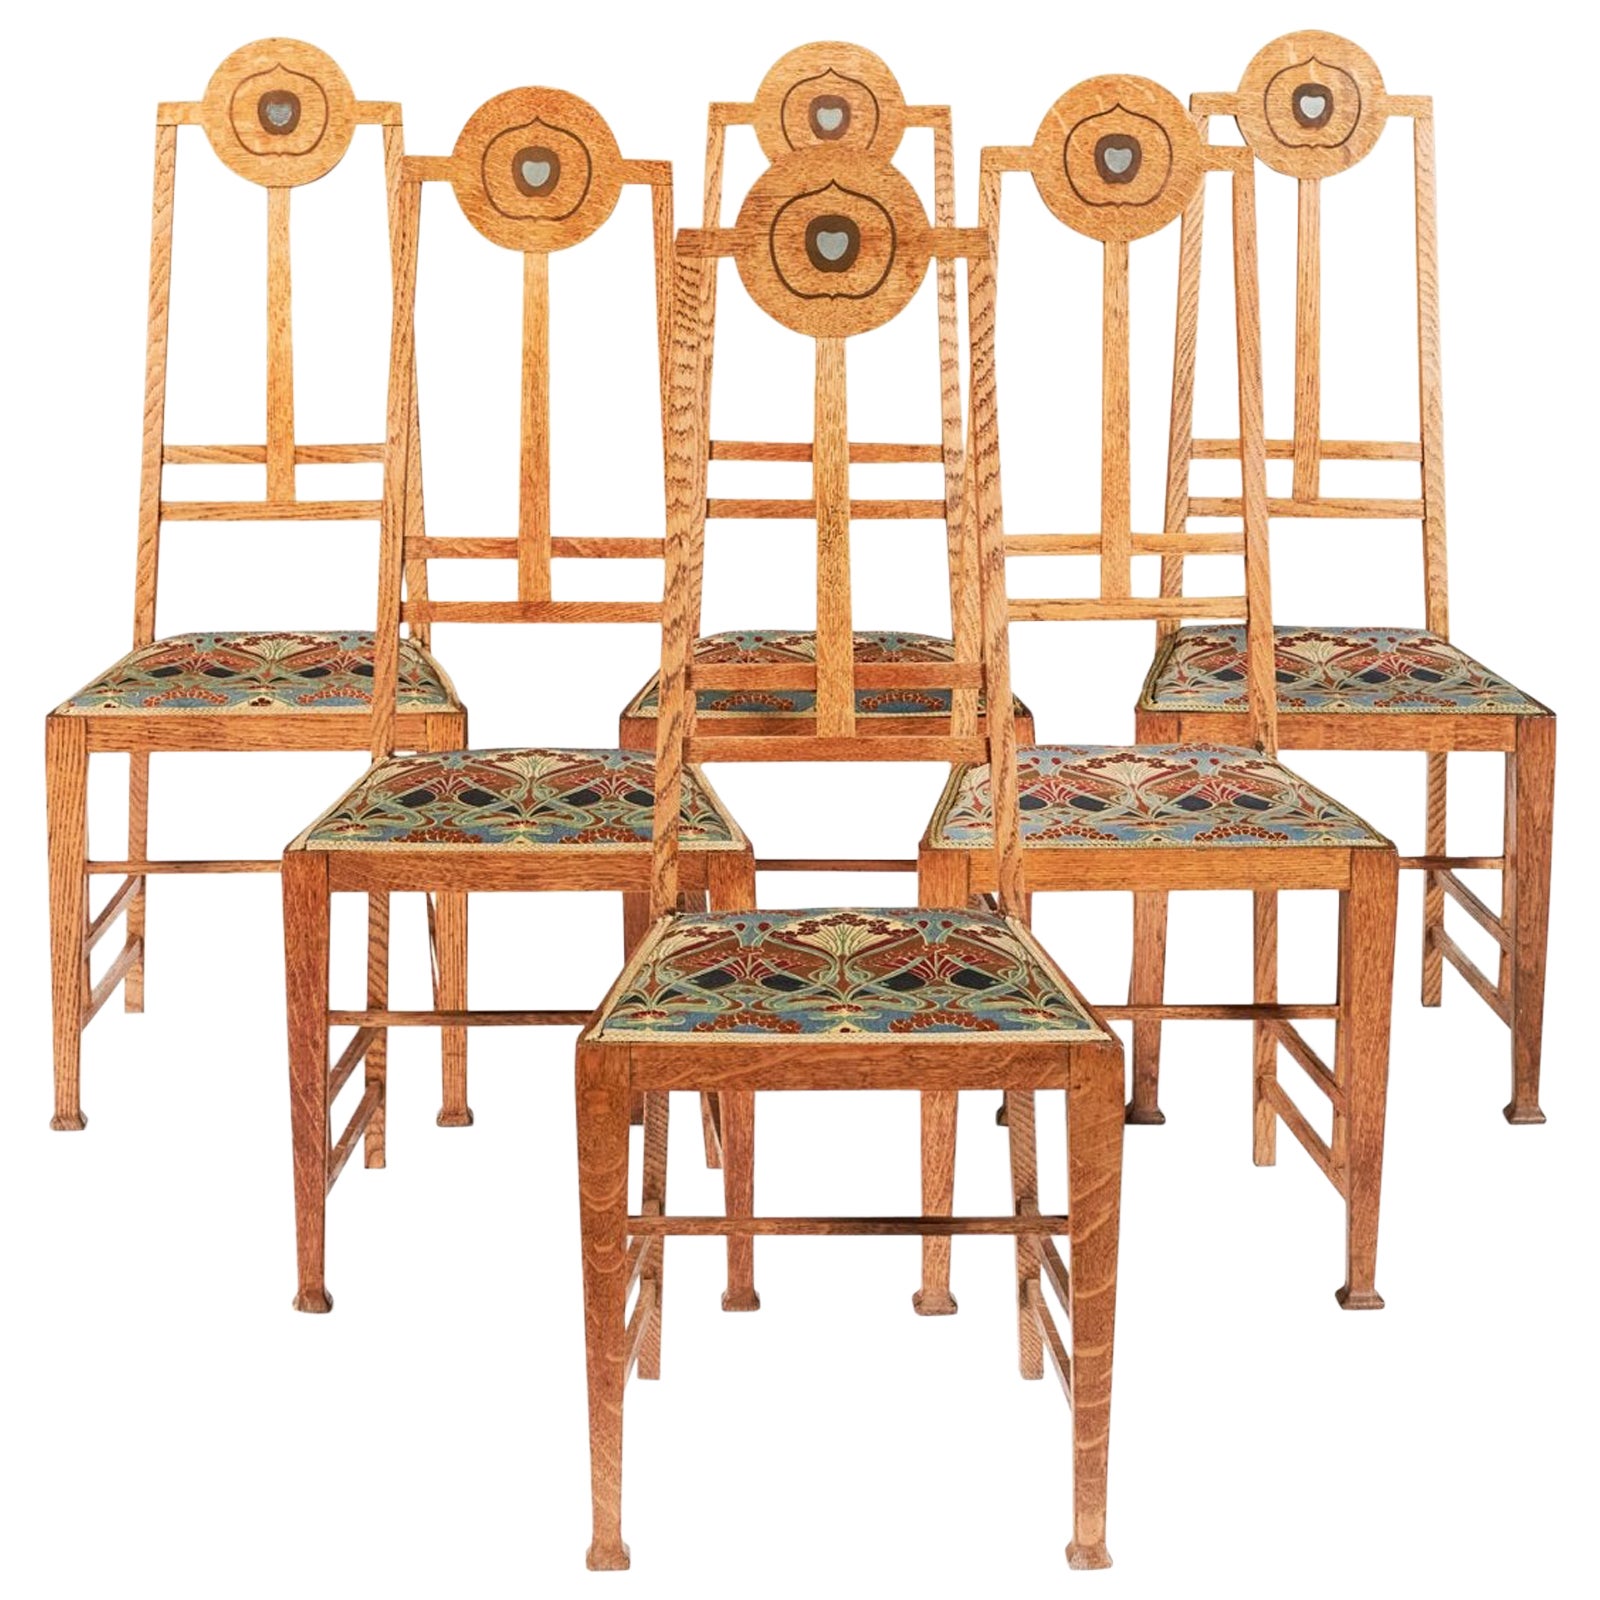 G M Ellwood for J S Henry. A rare set of eight Arts and Crafts oak dining chairs For Sale